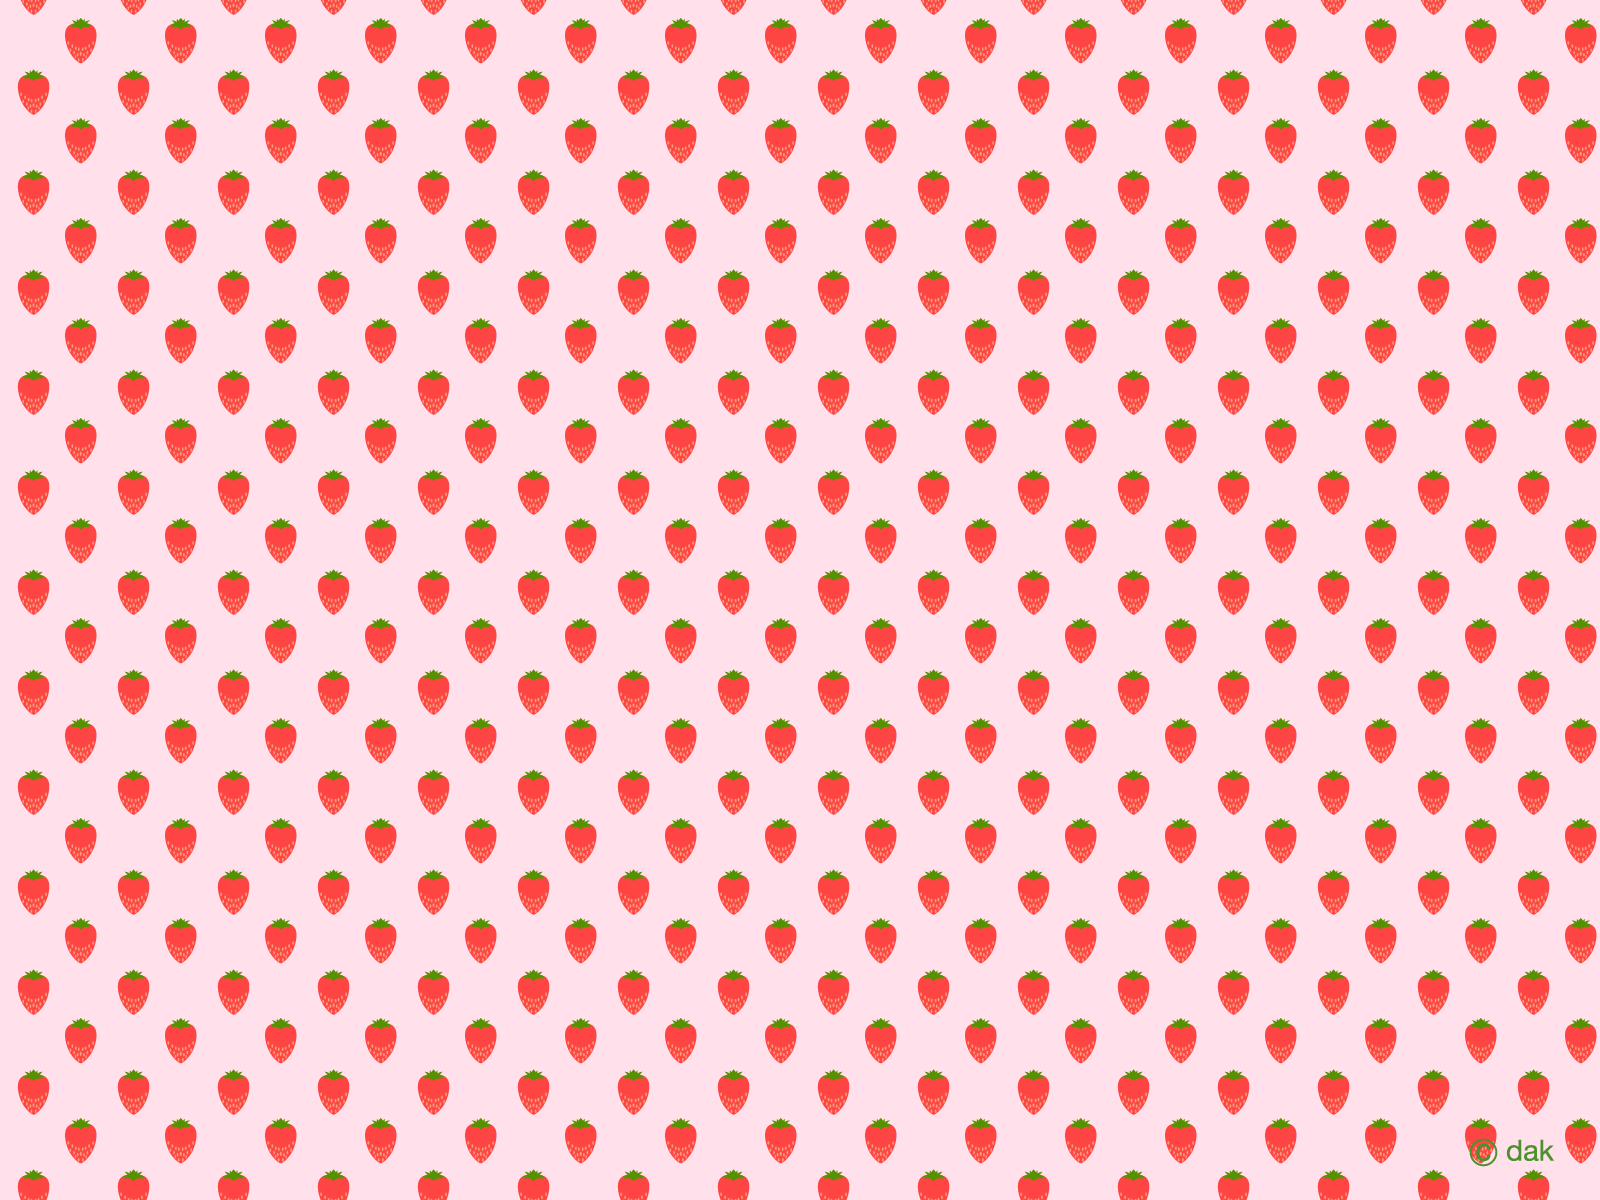 Delightful strawberry background in high resolution